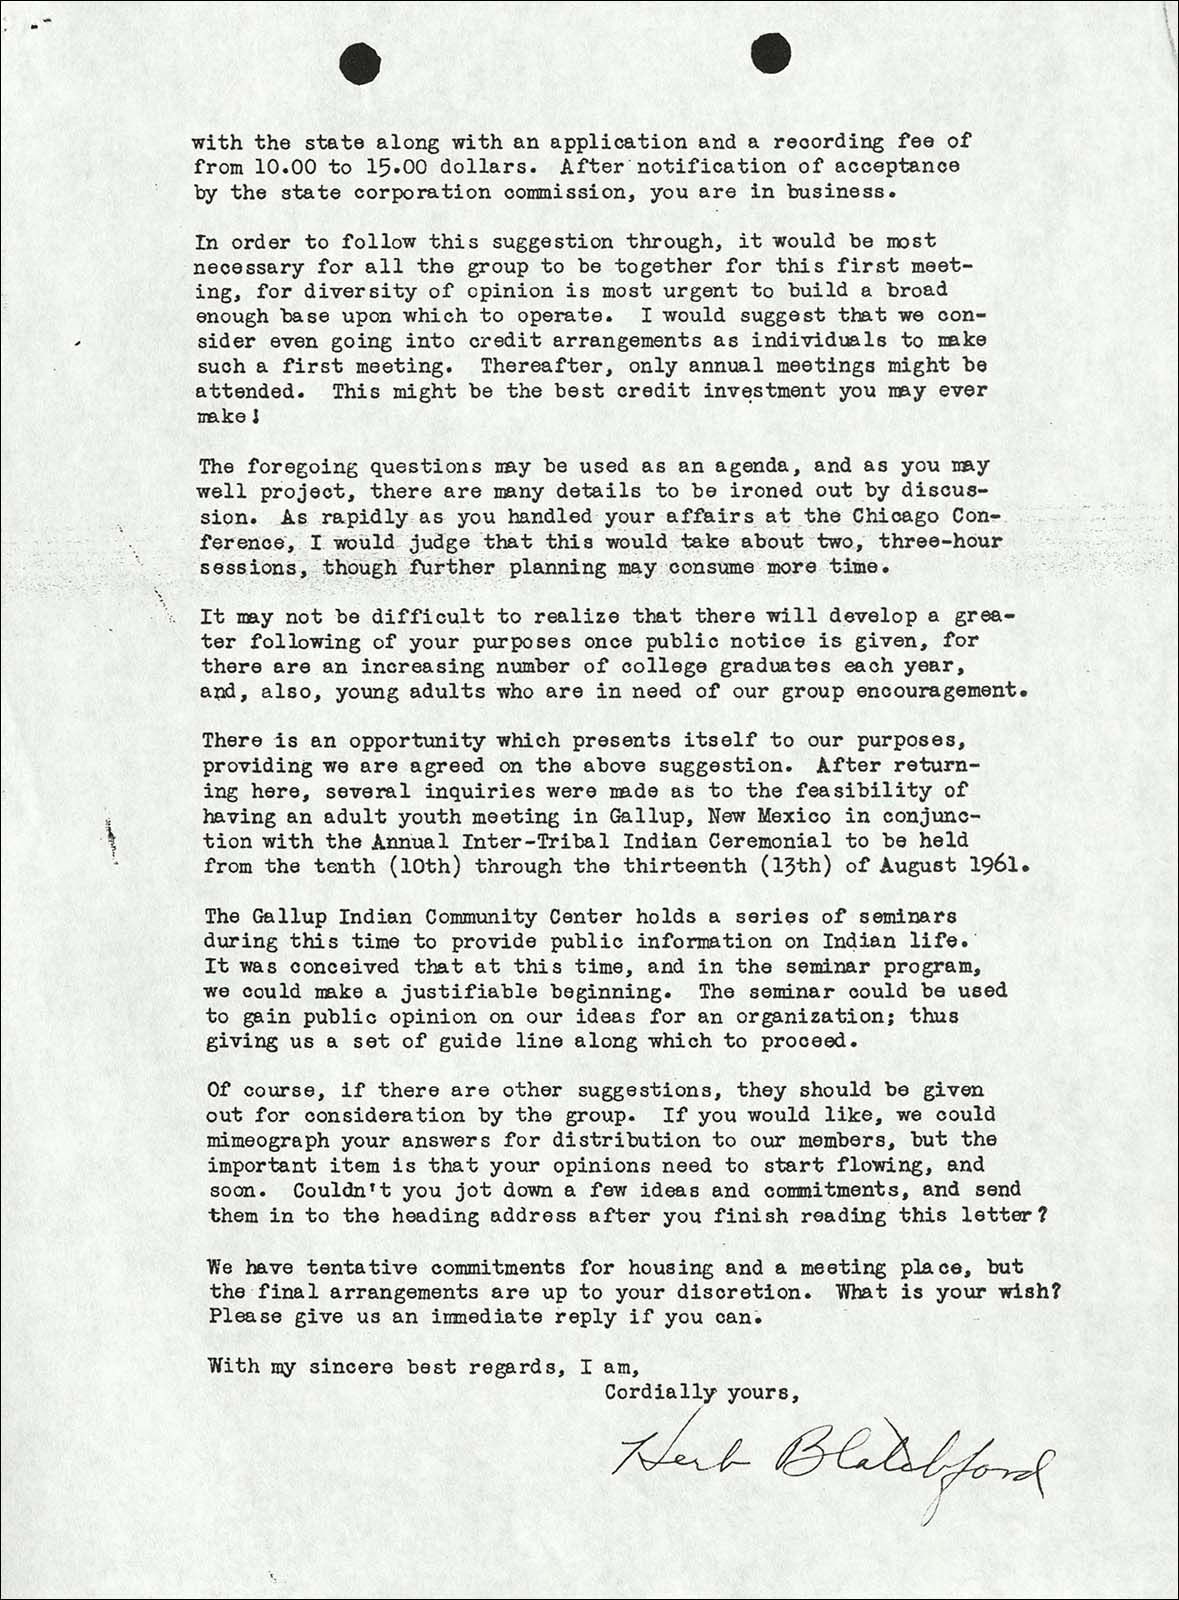 Letter from Herb Blatchford to Mel Thom, page 3